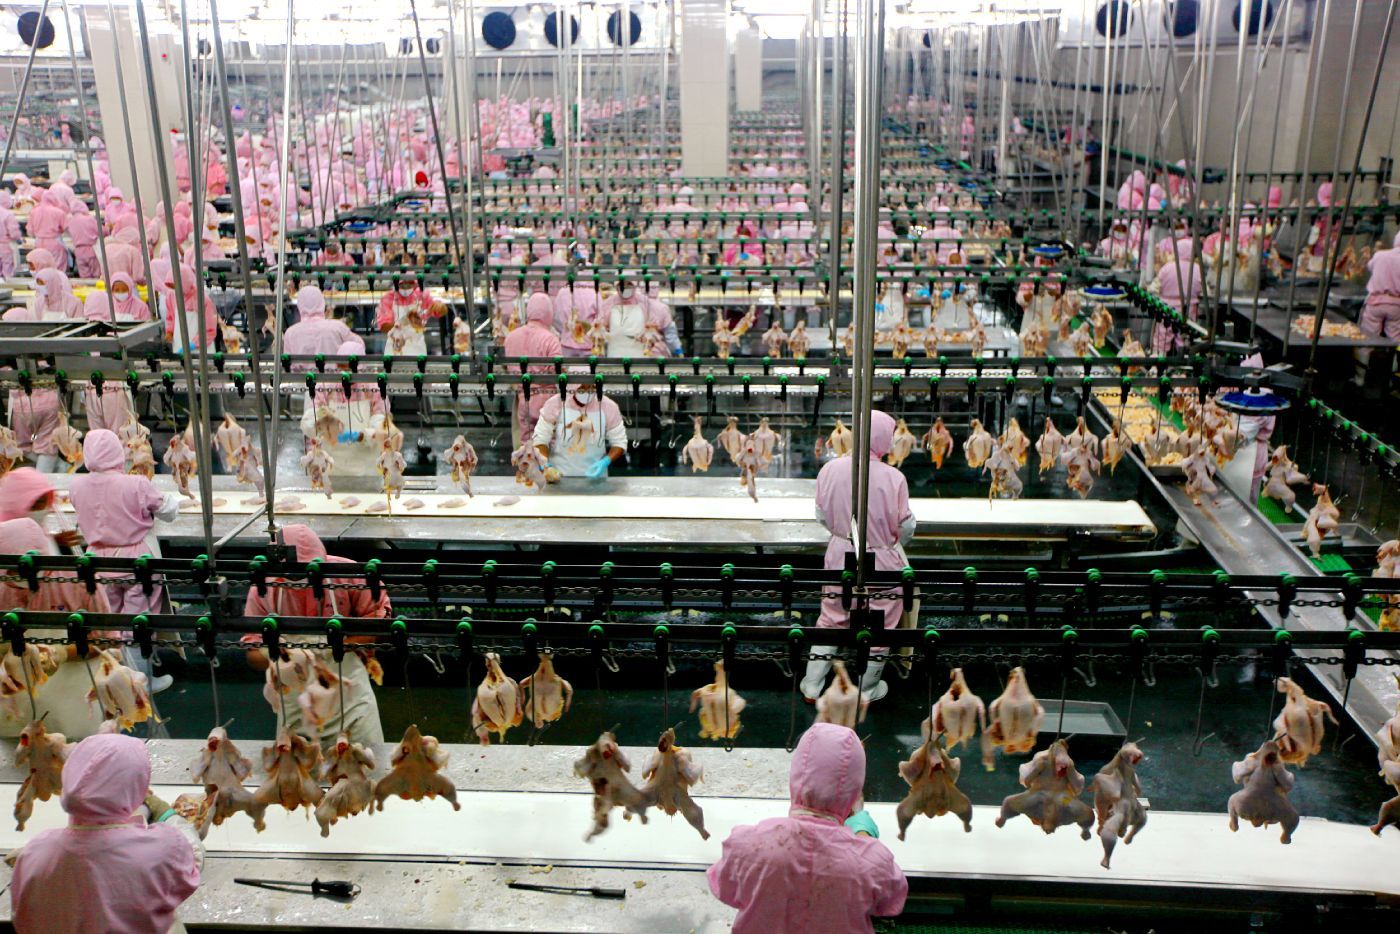 Workers on the line at a Tyson chicken processing plant - poultry